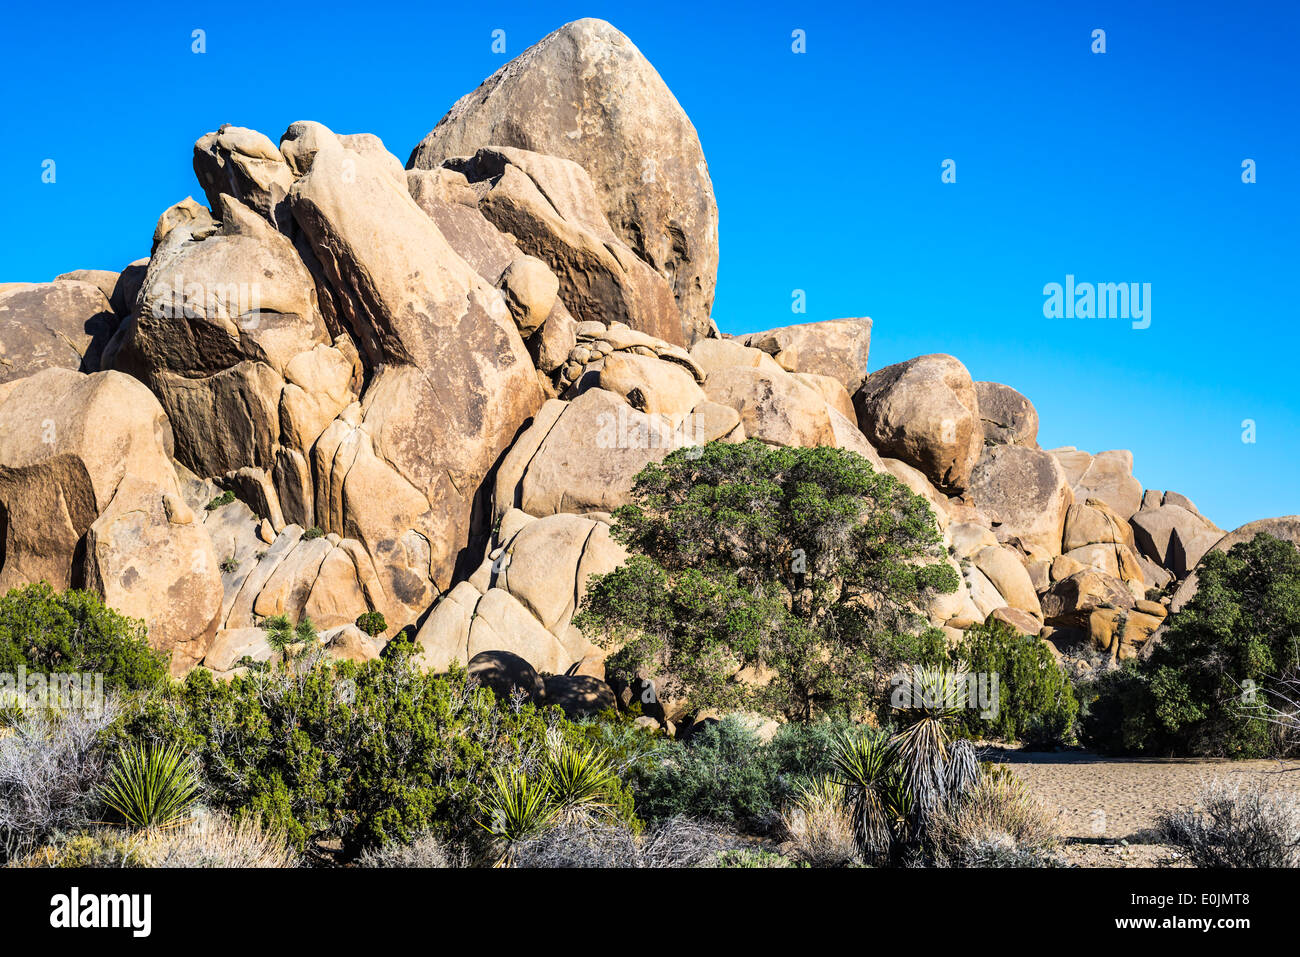 Live Oak rest area. Rock formation called 'The Pope's Hat.' Joshua Tree National Park, California, United States. Stock Photo